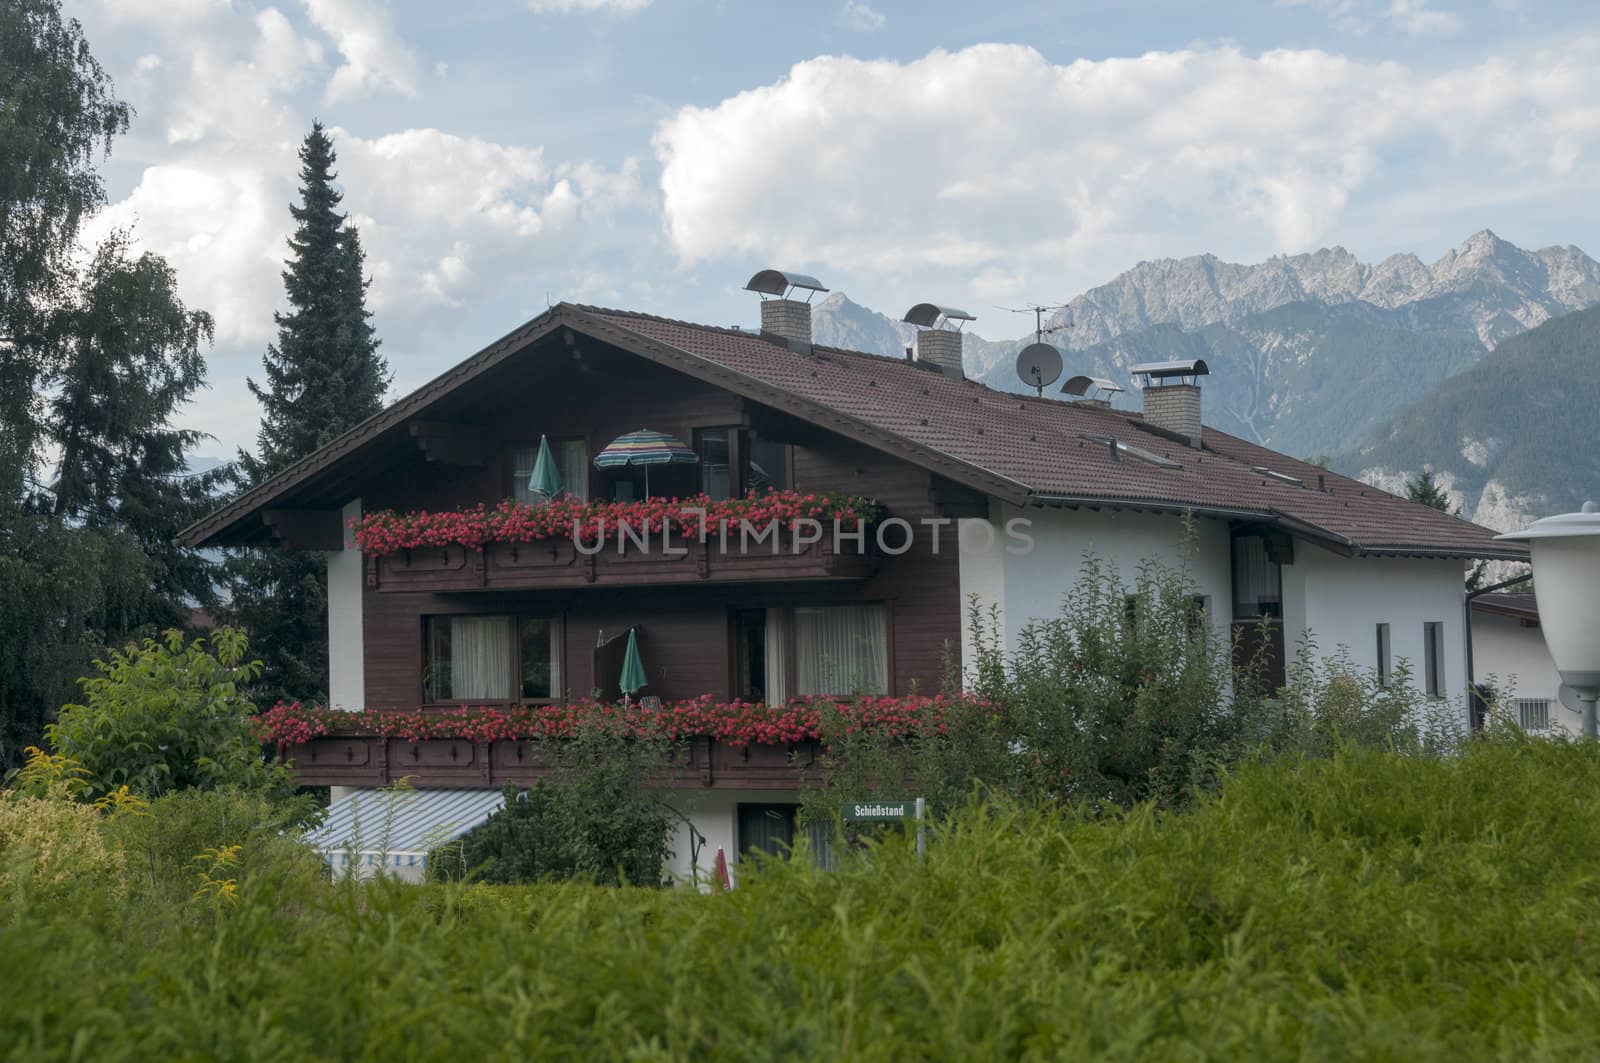 traditonal house in austria with flowers by compuinfoto